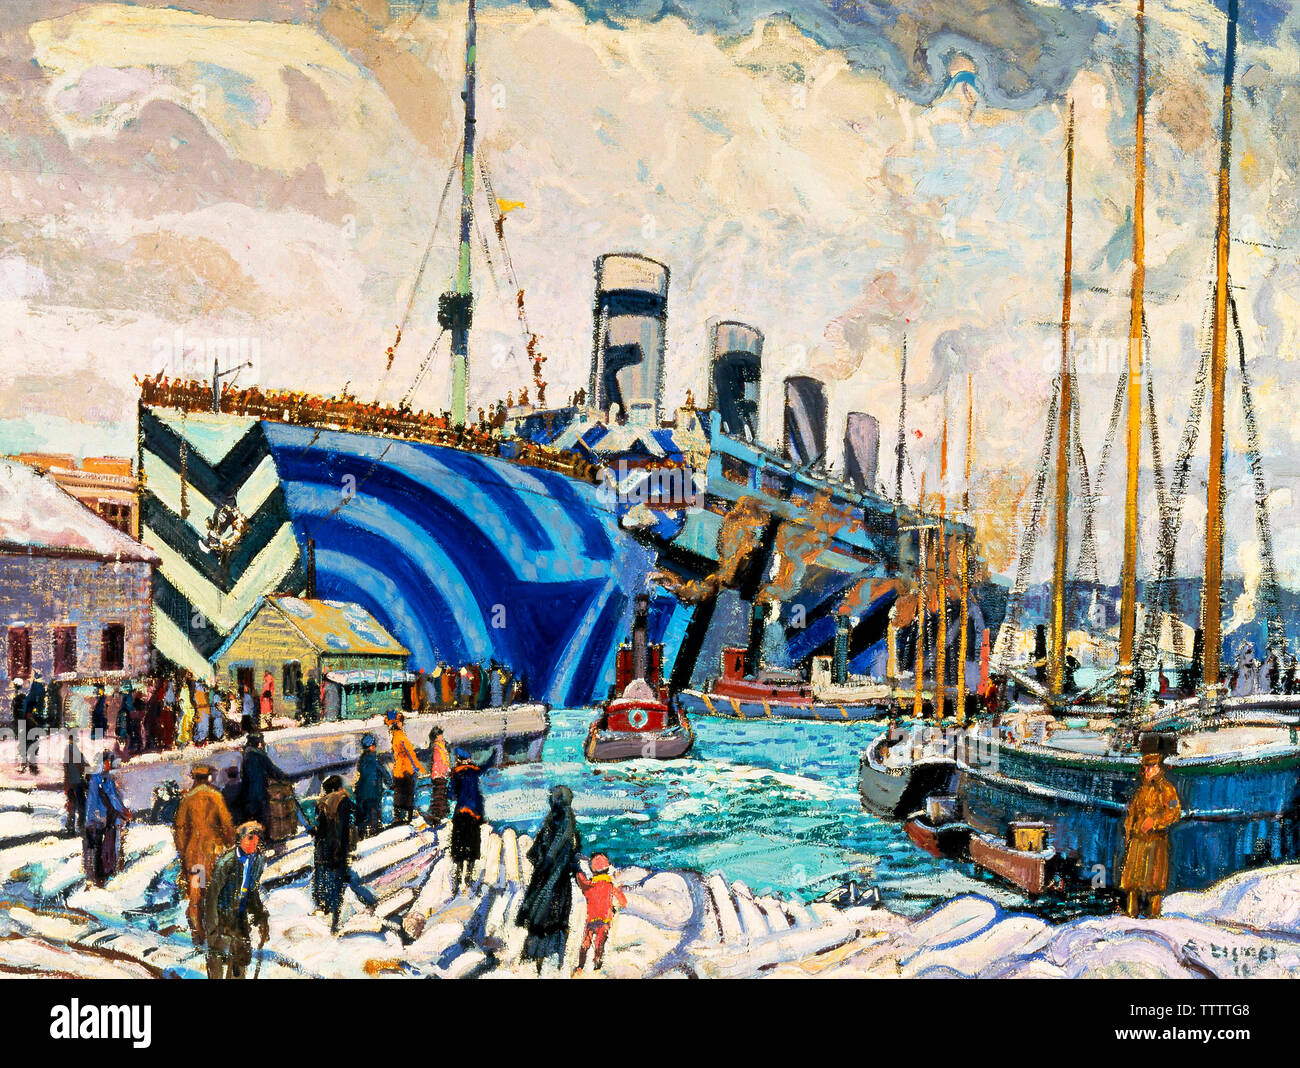 Olympic with Returned Soldiers - War artist Arthur Lismer captured the return of the troopship SS Olympic (centre) to Halifax harbour following the First World War. Olympic's multi-coloured dazzle camouflage, added in 1917 at the height of the German U-Boat threat, was intended to make the ship more difficult to identify and target. The painting also provides a glimpse of the busy Halifax dockyard, Canada's principal wartime naval base. Pressed into service in 1915, Olympic became one of the war's most famous troop ships. Affectionately known as 'Old Reliable,' Olympic would carry over 200,000 Stock Photo